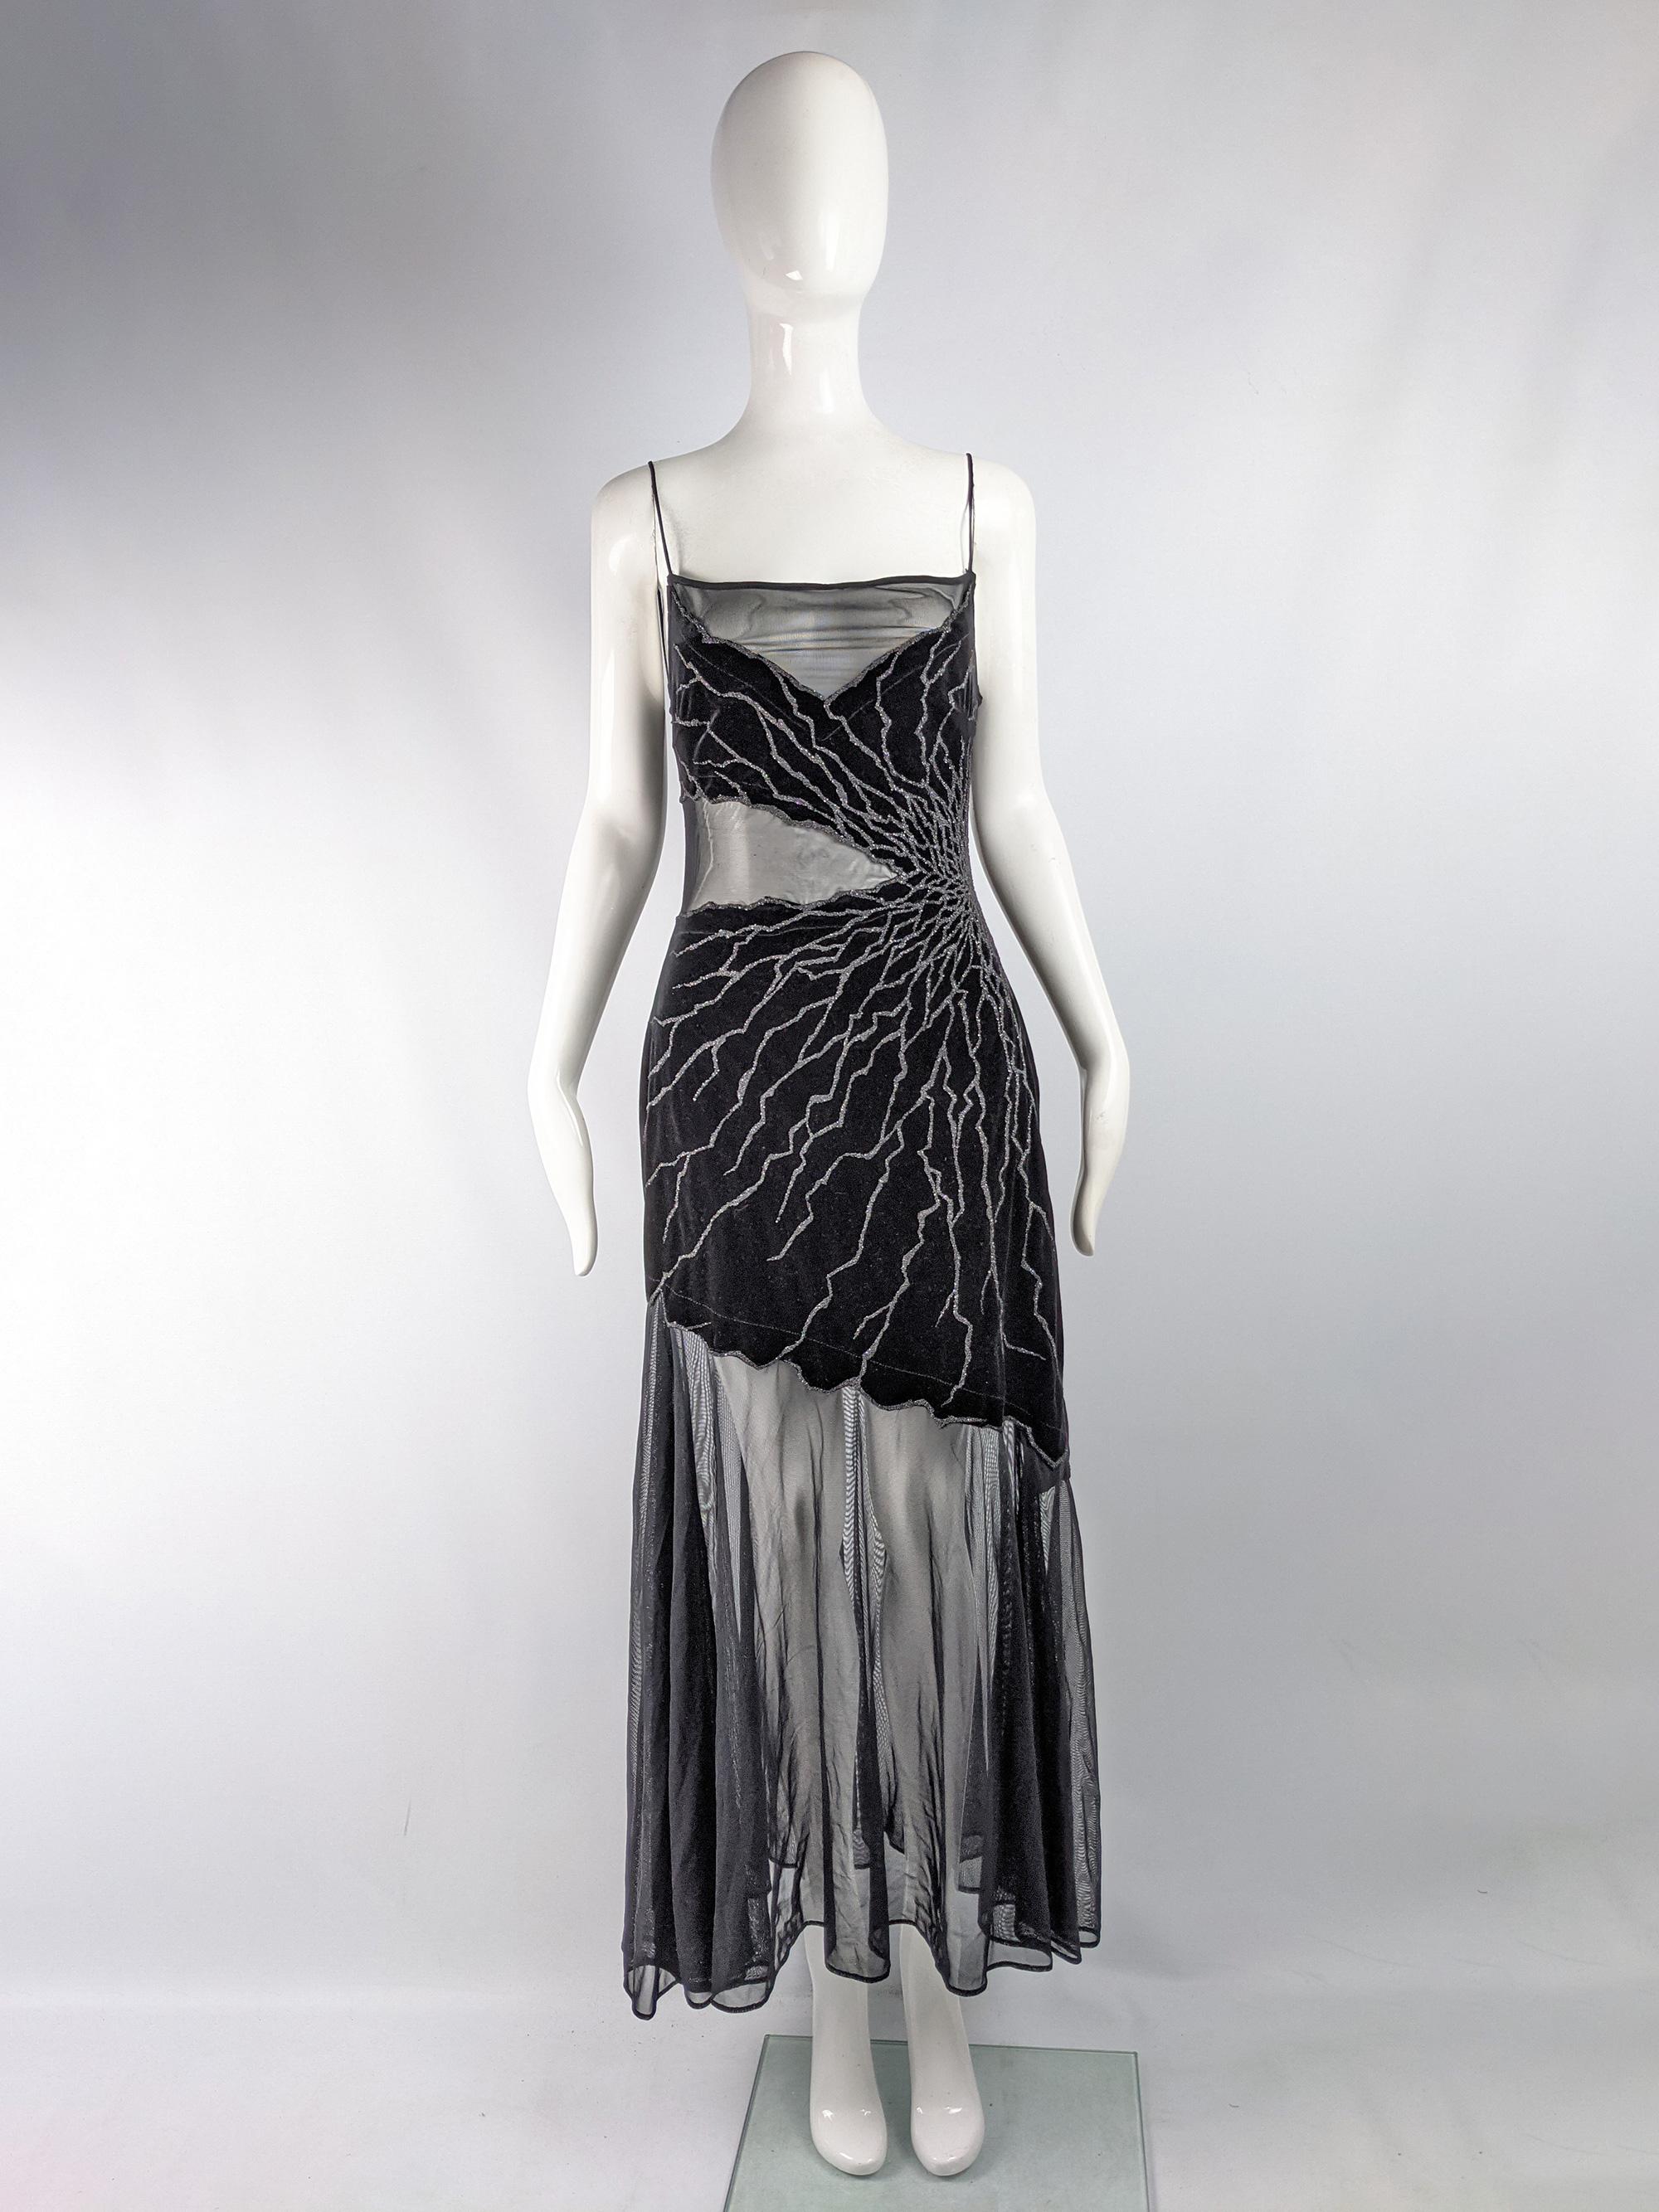 A stunning vintage womens maxi party / red carpet evening dress from the 80s by luxury American- Japanese fashion designer, Tadashi Shoji. In a black fine mesh with sexy cut out beaded velvet panels. 

Size: Marked S but best fits a UK 8-10/ US 4-6/